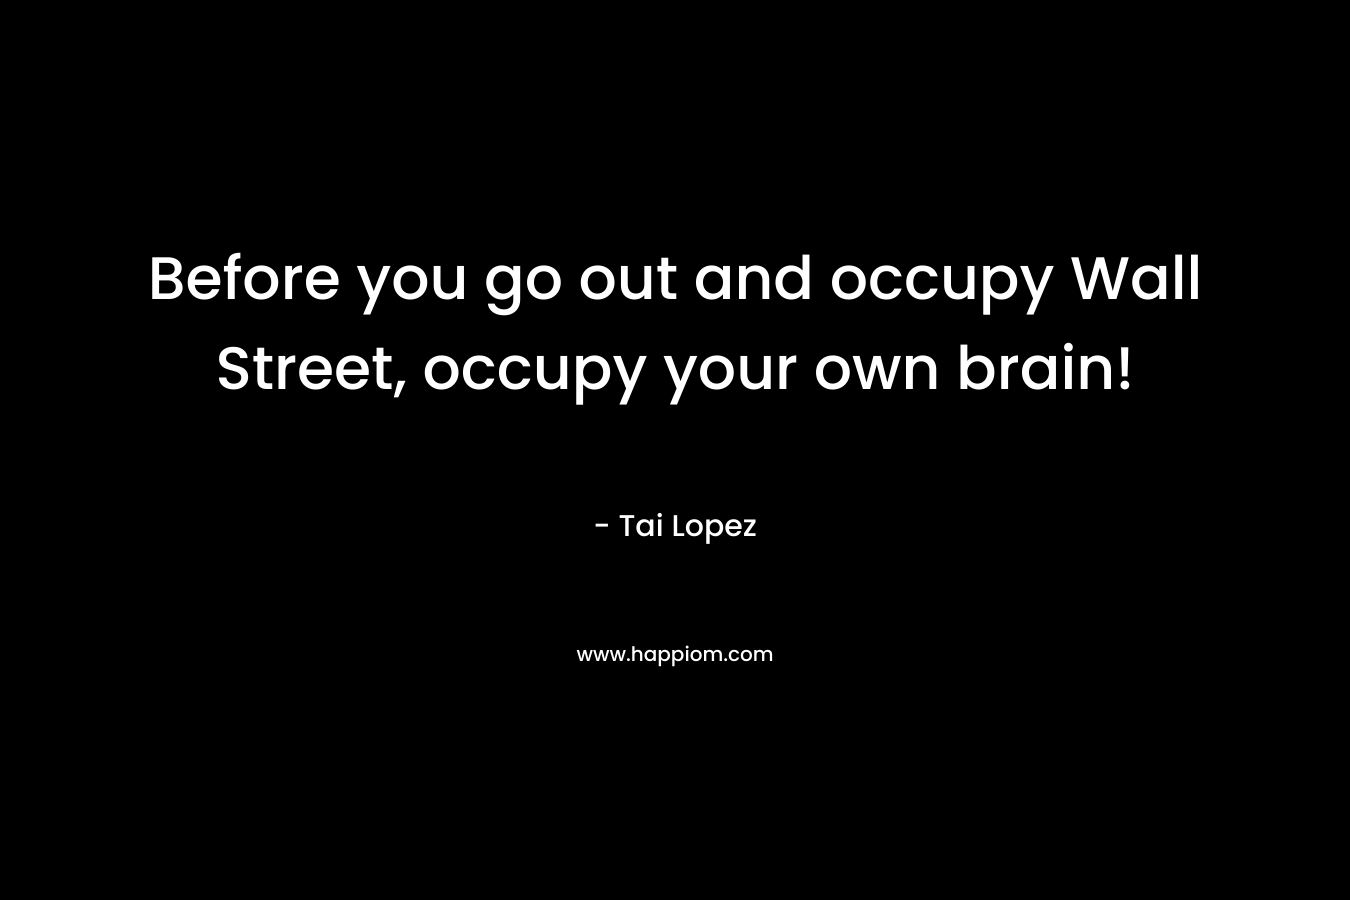 Before you go out and occupy Wall Street, occupy your own brain!